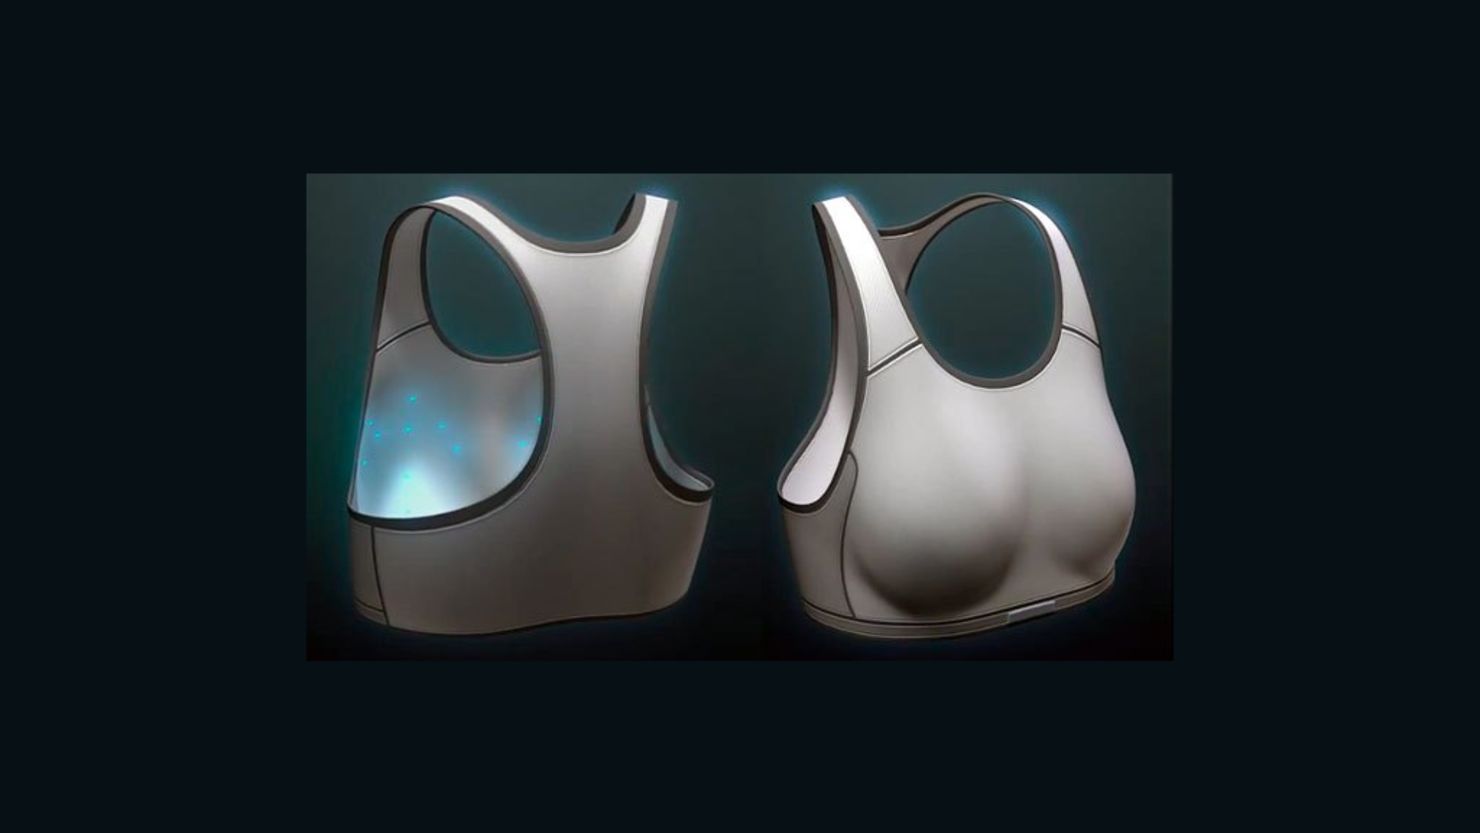 To increase early detection of breast cancer, MIT researchers are  developing a screening device that can be worn over a bra